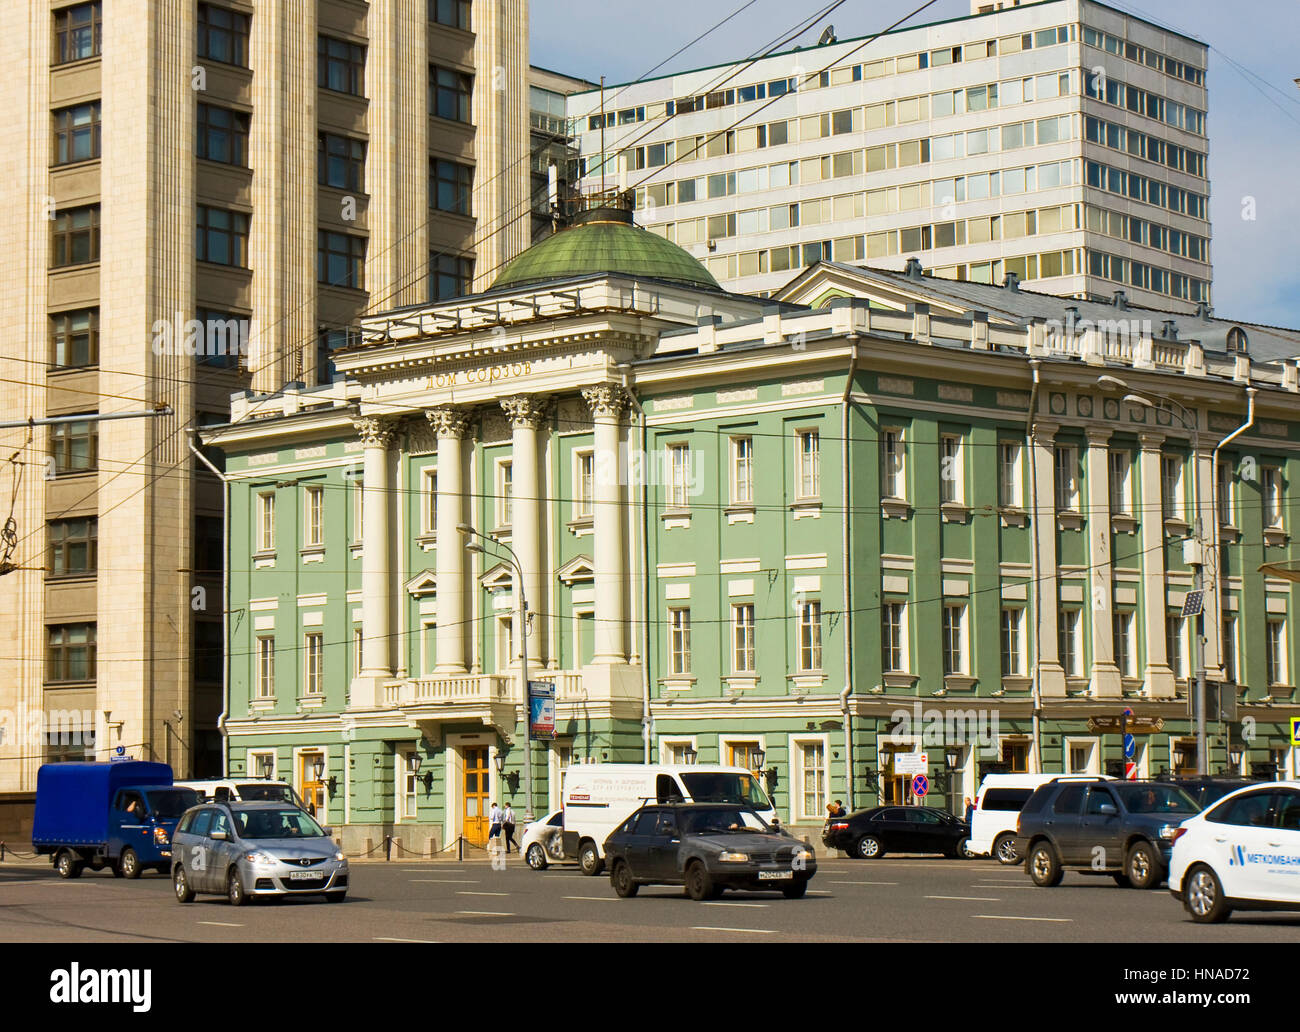 MOSCOW - MAY 15, 2014: House of Unions, has been built in 1775 year by architect Kazakov in classicism style, cross of Ohotny ryad and Big Dmitrovka s Stock Photo